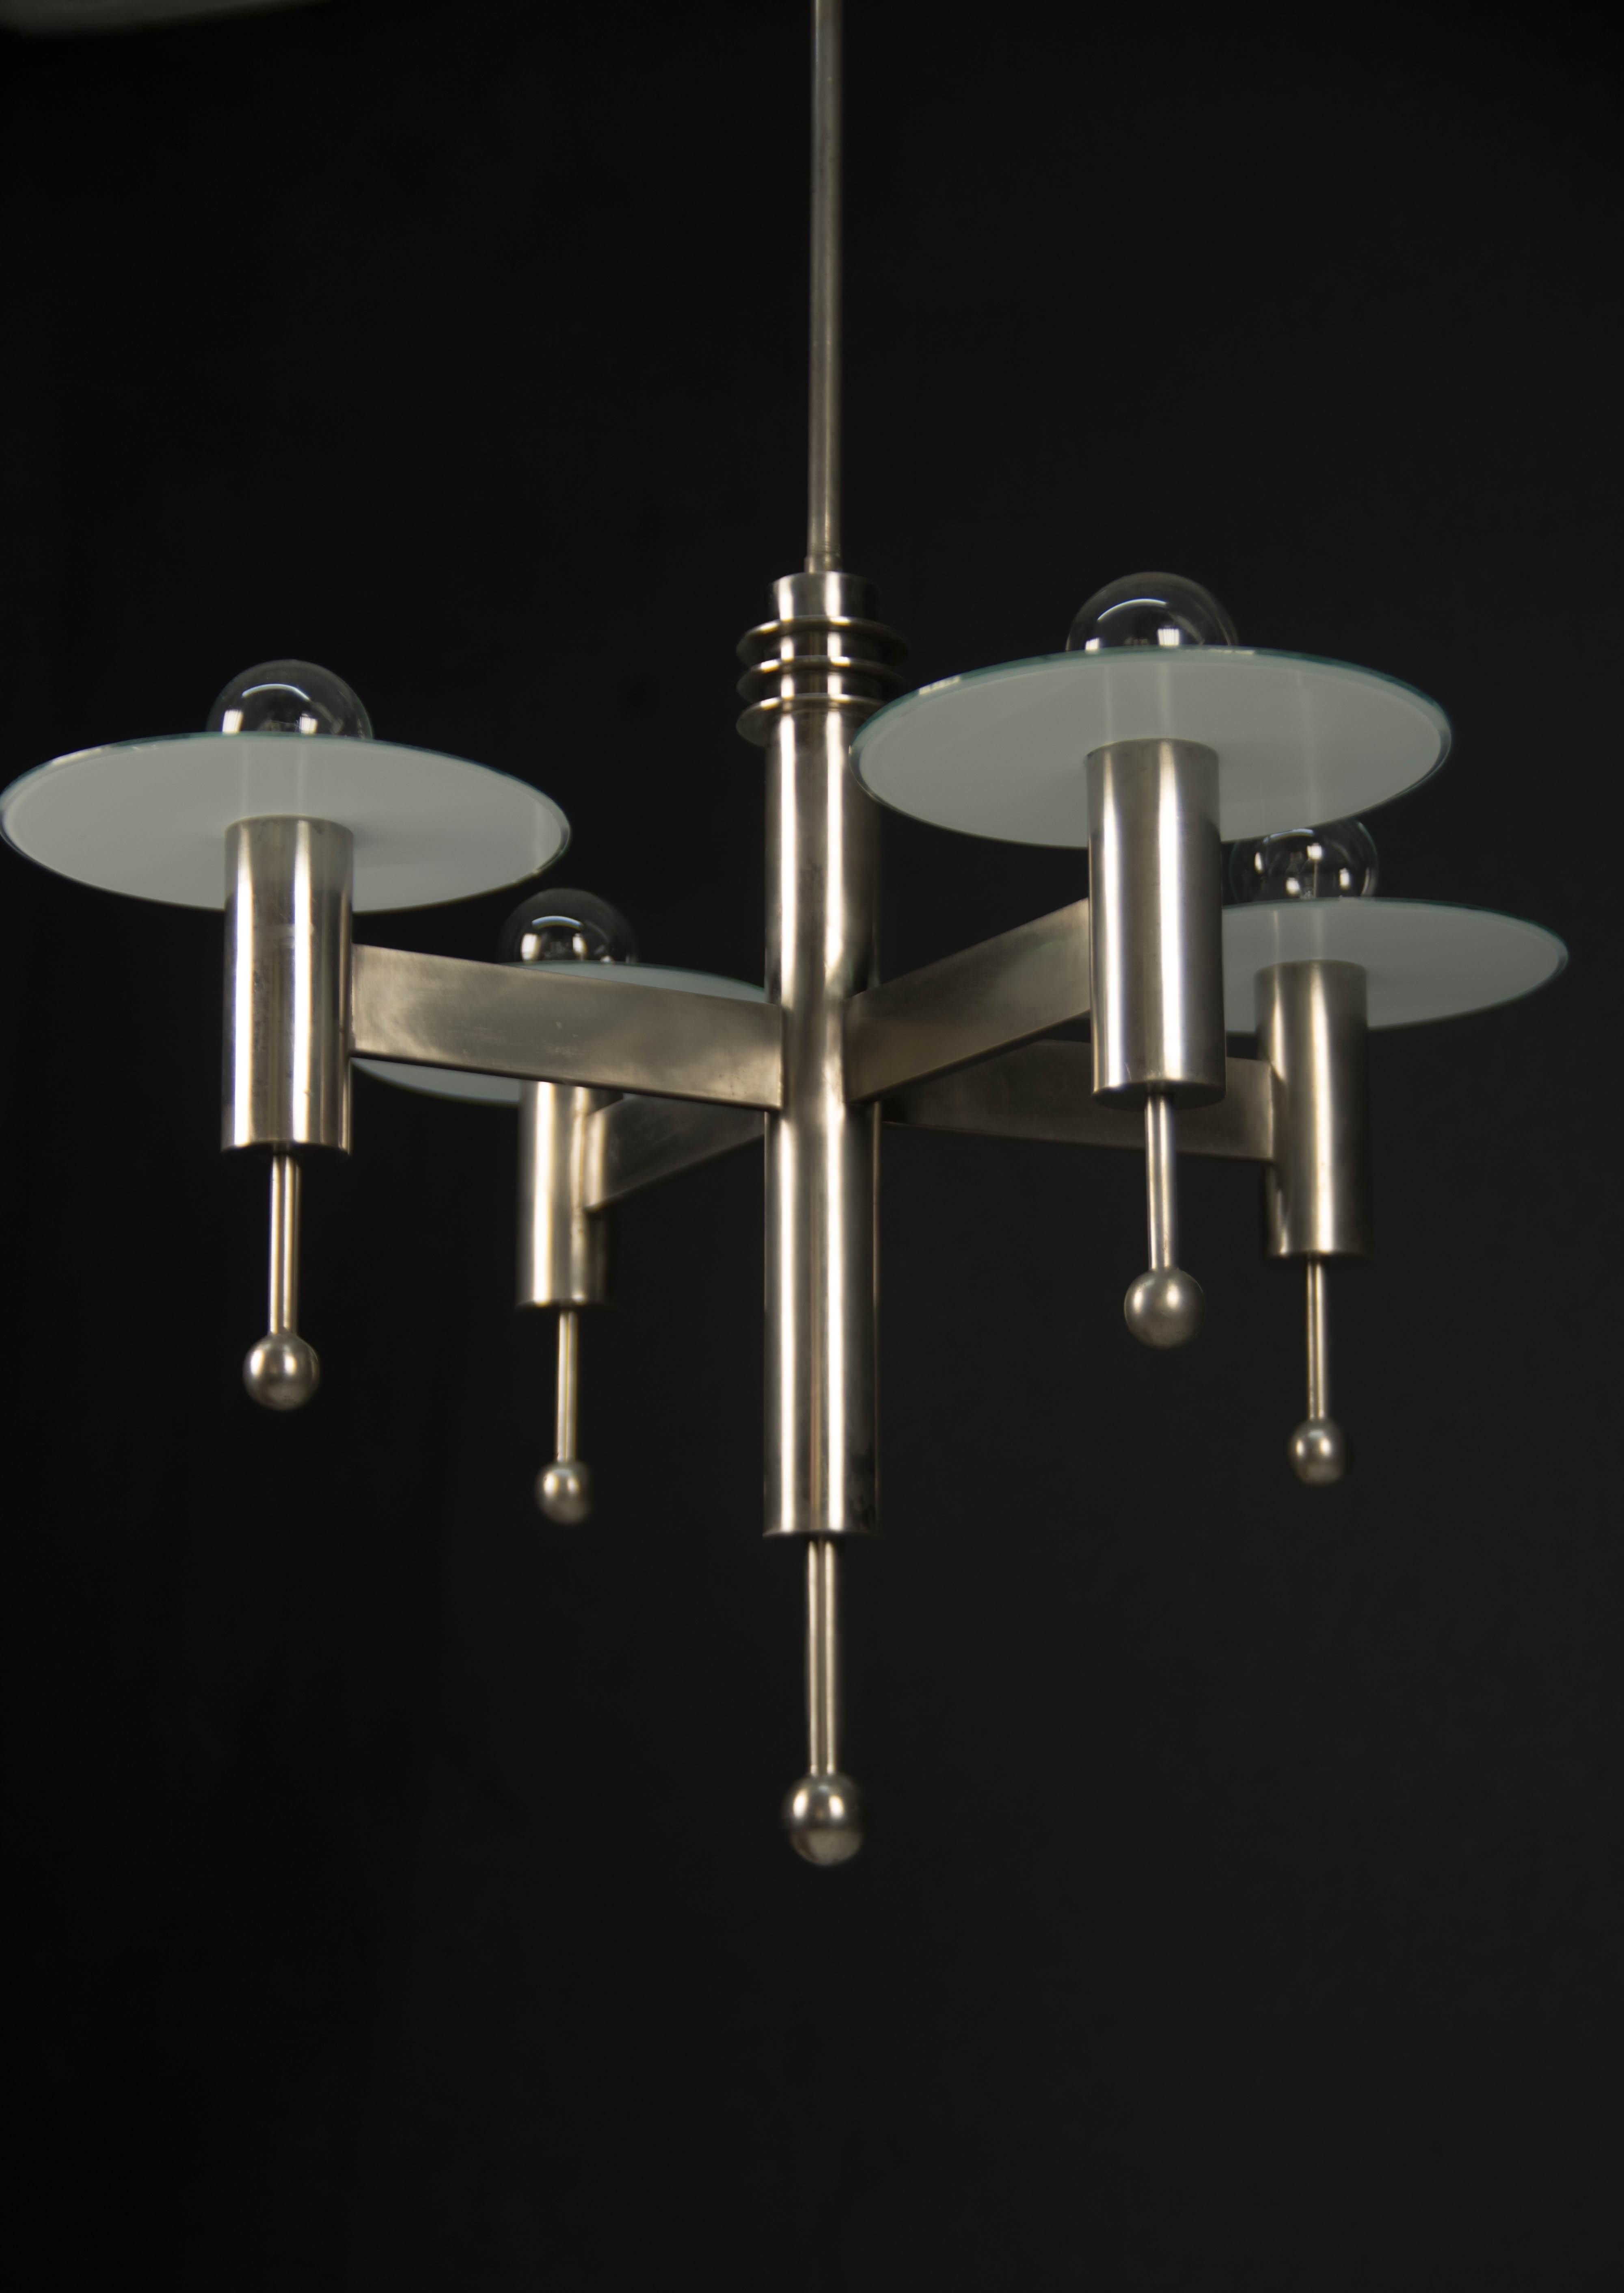 Rare Space Age chandelier. Very eye-catching piece!
Original nickel with minimum age patina - polished
Original opaline glass- diameter of glass - 21cm
4x40W, E25-E27 bulbs
US wiring compatible.
Shipping quote on request